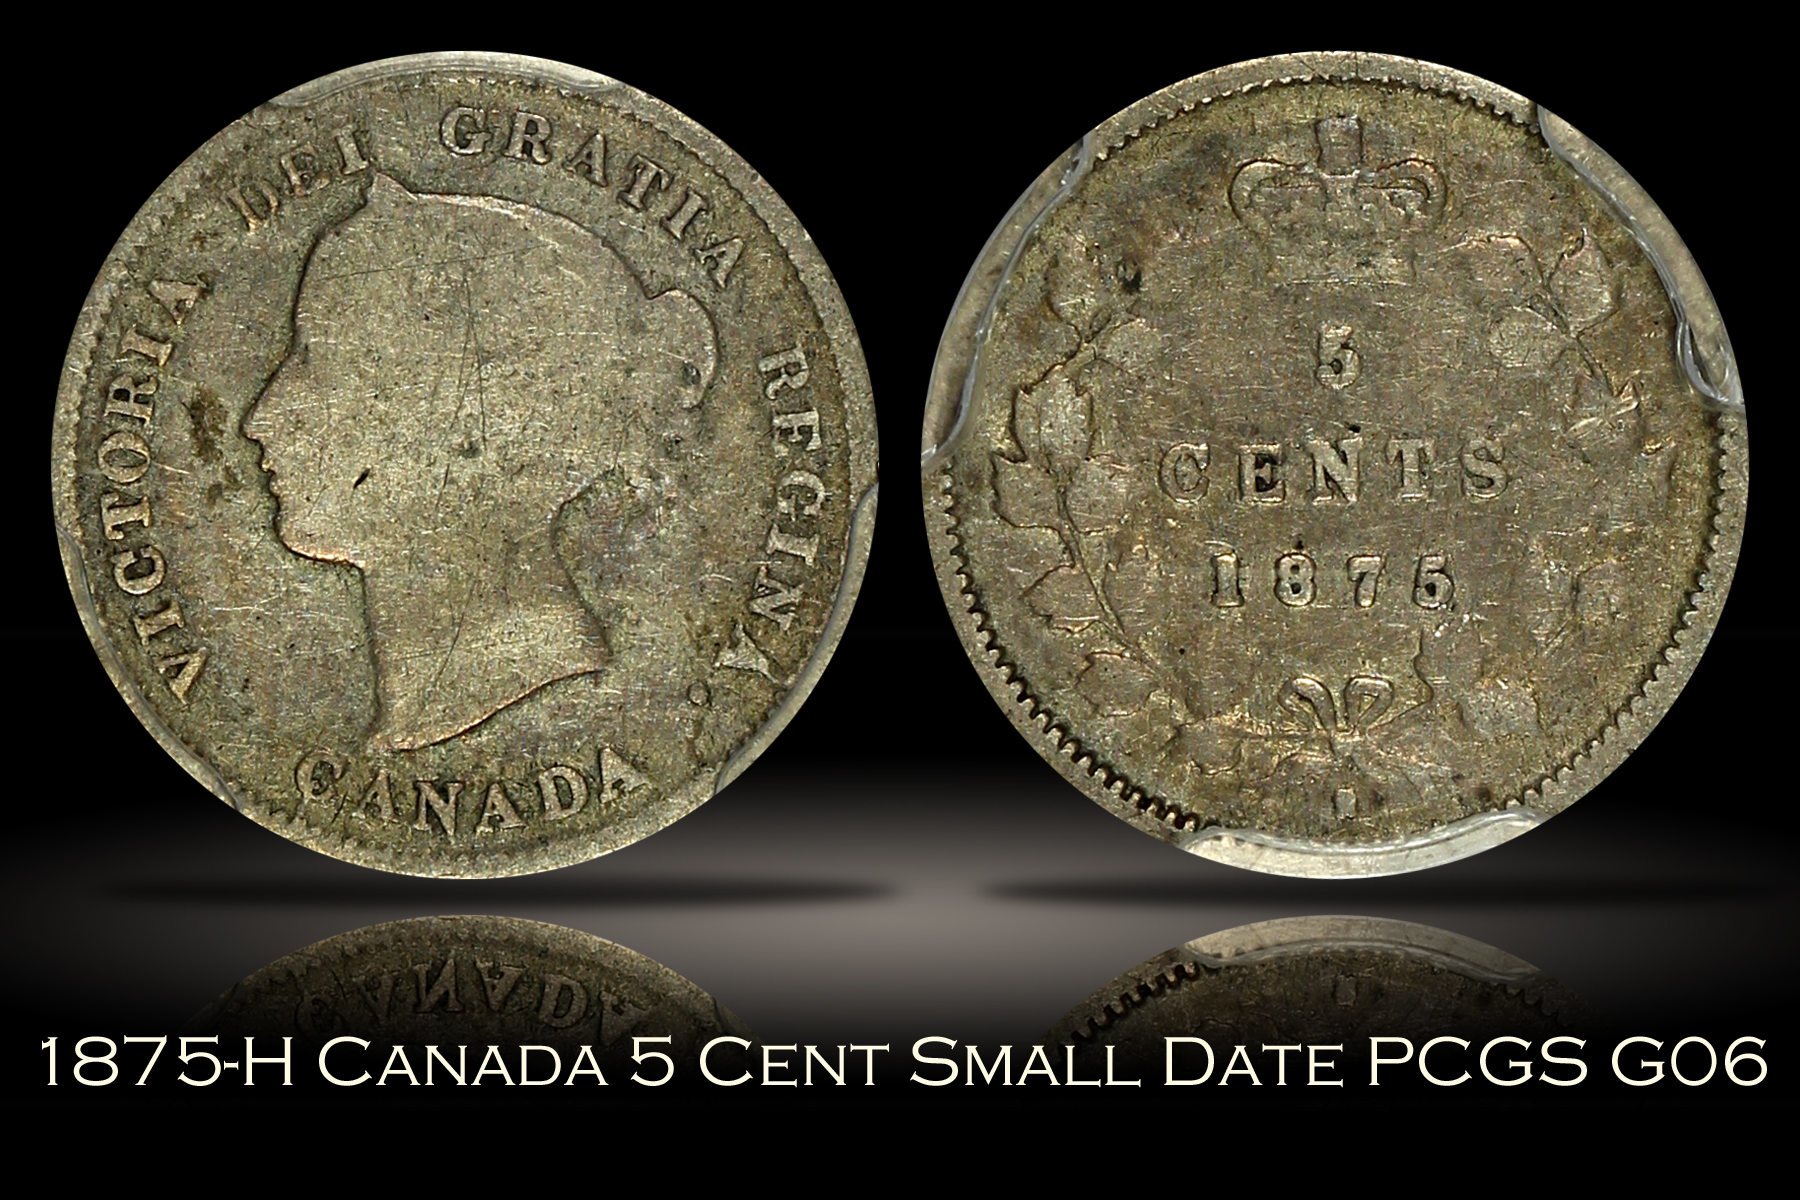 1875-H Canada 5 Cent Small Date PCGS G06